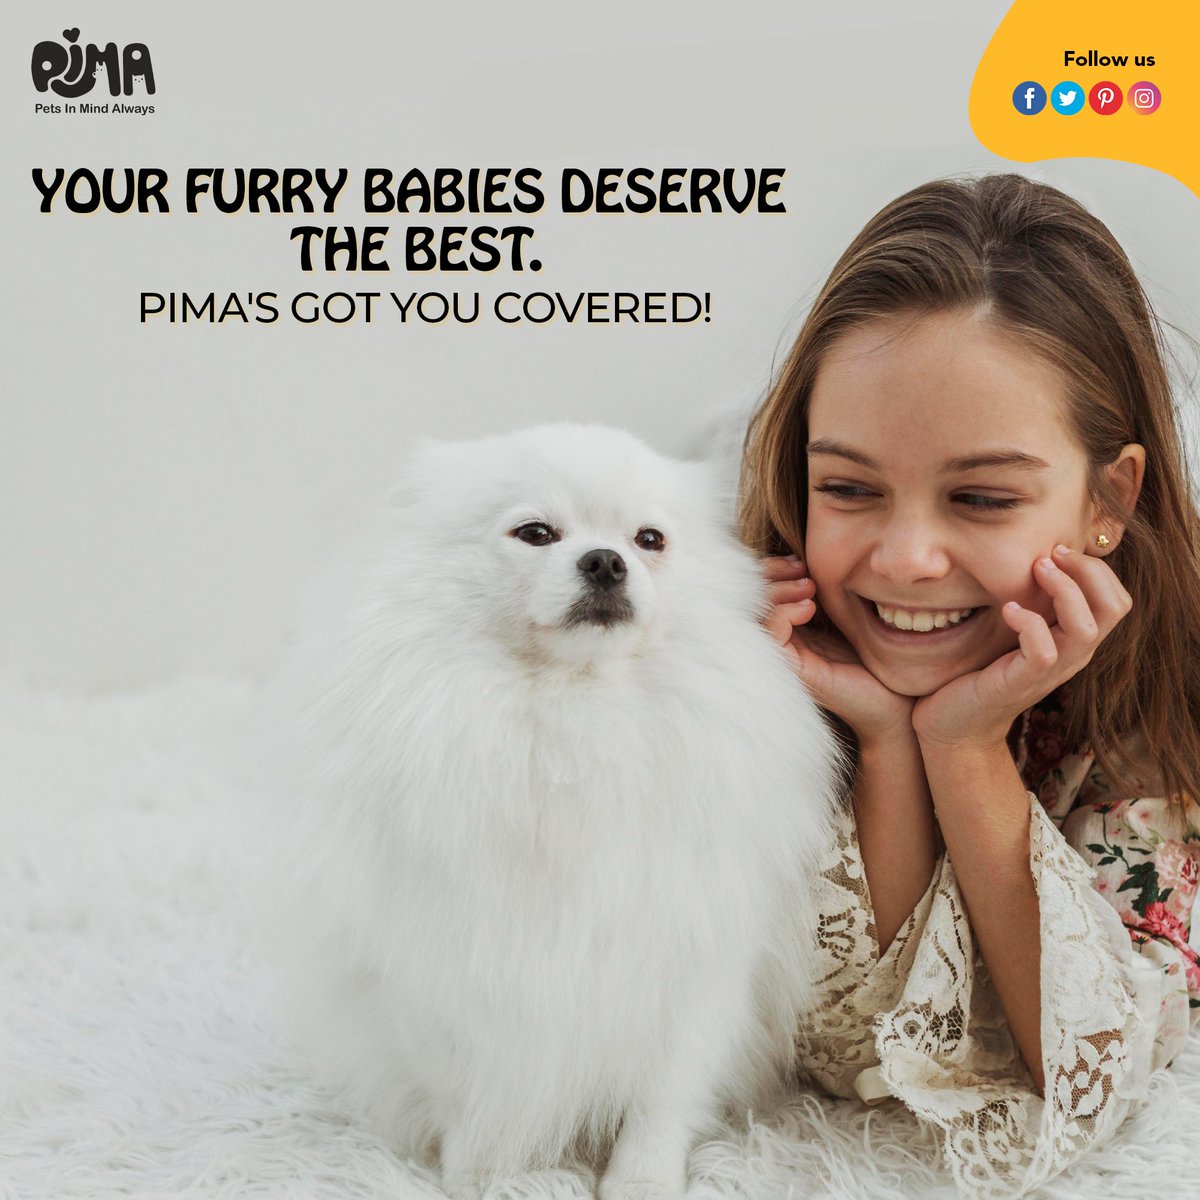 Yo, fellow fur parents! Don't let your babies down, get them Pima's top-notch pet products! Trust us, they'll thank you with loads of tail wags and purrs. 🐾🐶🐱

.

#PimaCanineCheeseChew #DogNutrition #TreatTime #DogLovers #NaturalDogTreats #HappyPup #CanineDelights #PimaPet